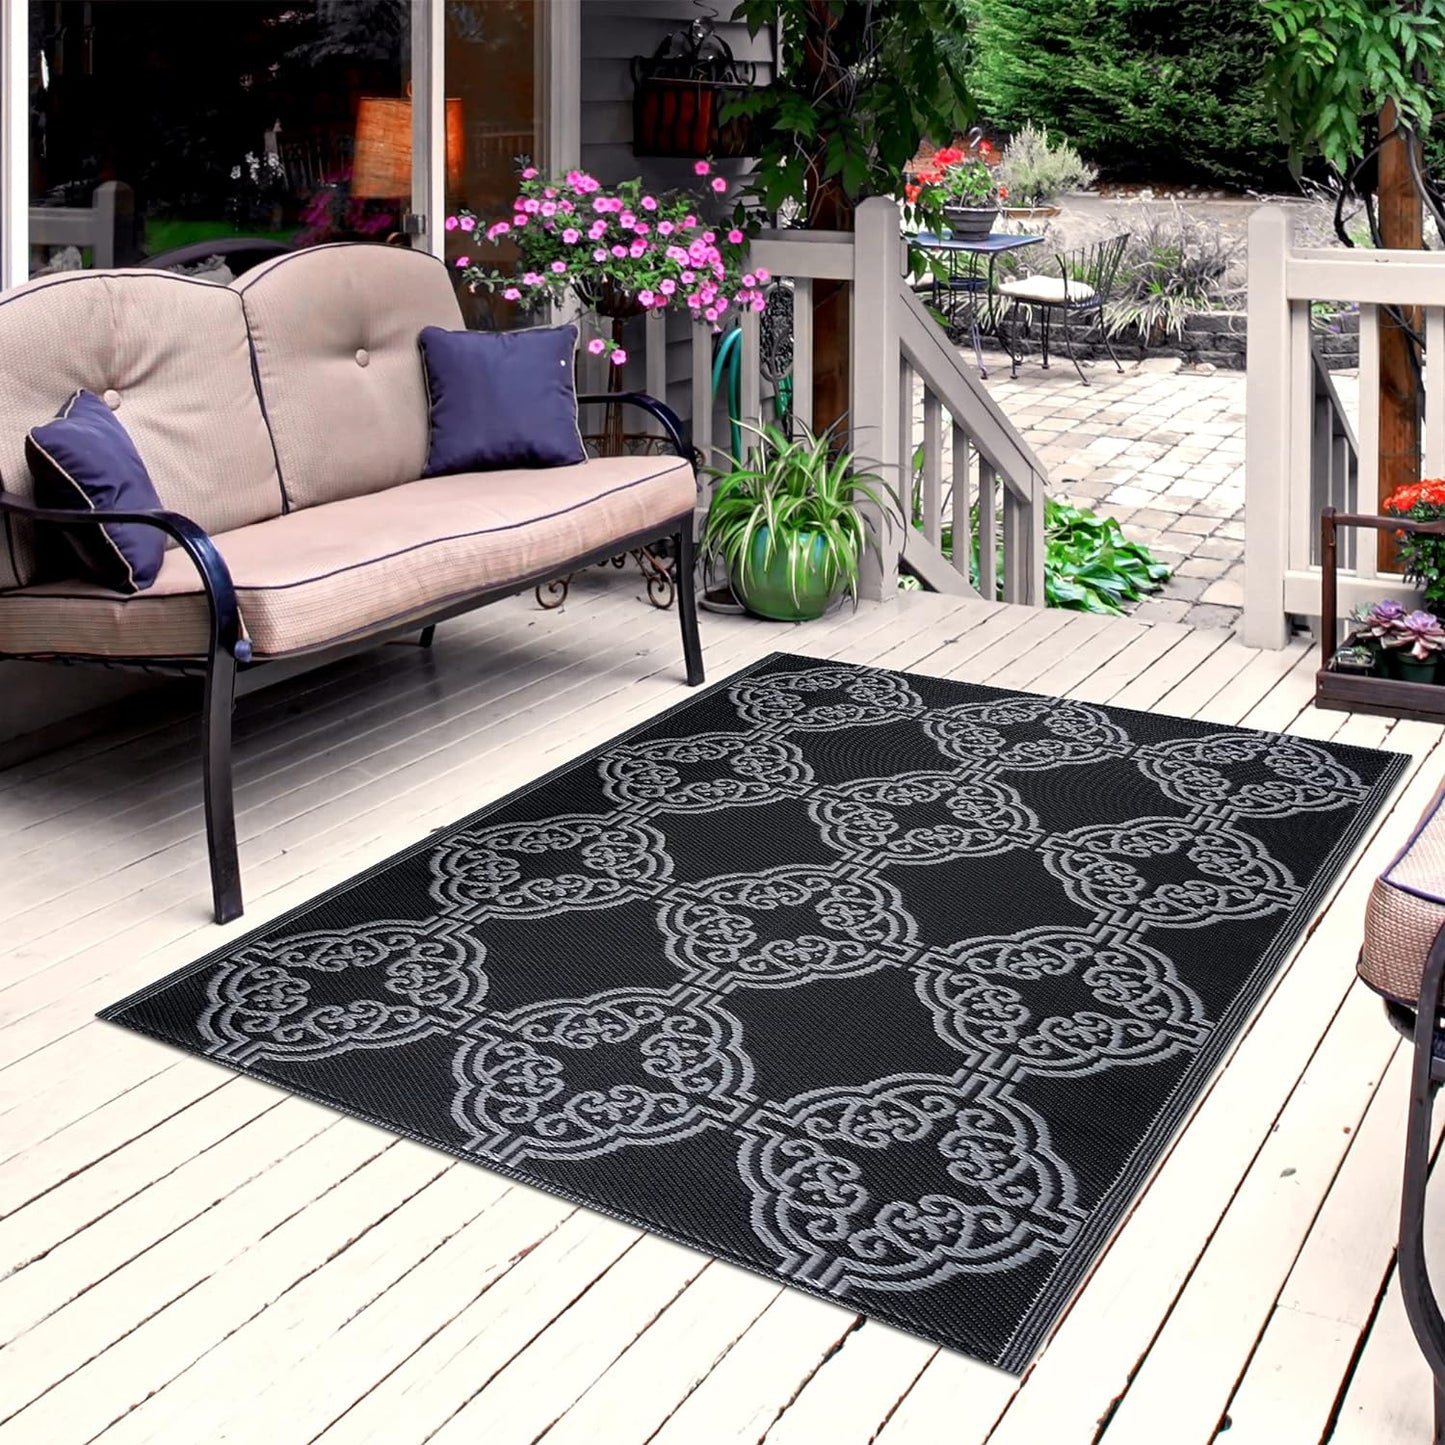 Playa Outdoor Rug - Crease-Free Recycled Plastic Floor Mat for Patio, Camping, Beach, Balcony, Porch, Deck - Weather, Water, Stain, Lightweight, Fade and UV Resistant - Marrakesh- Black & Gray